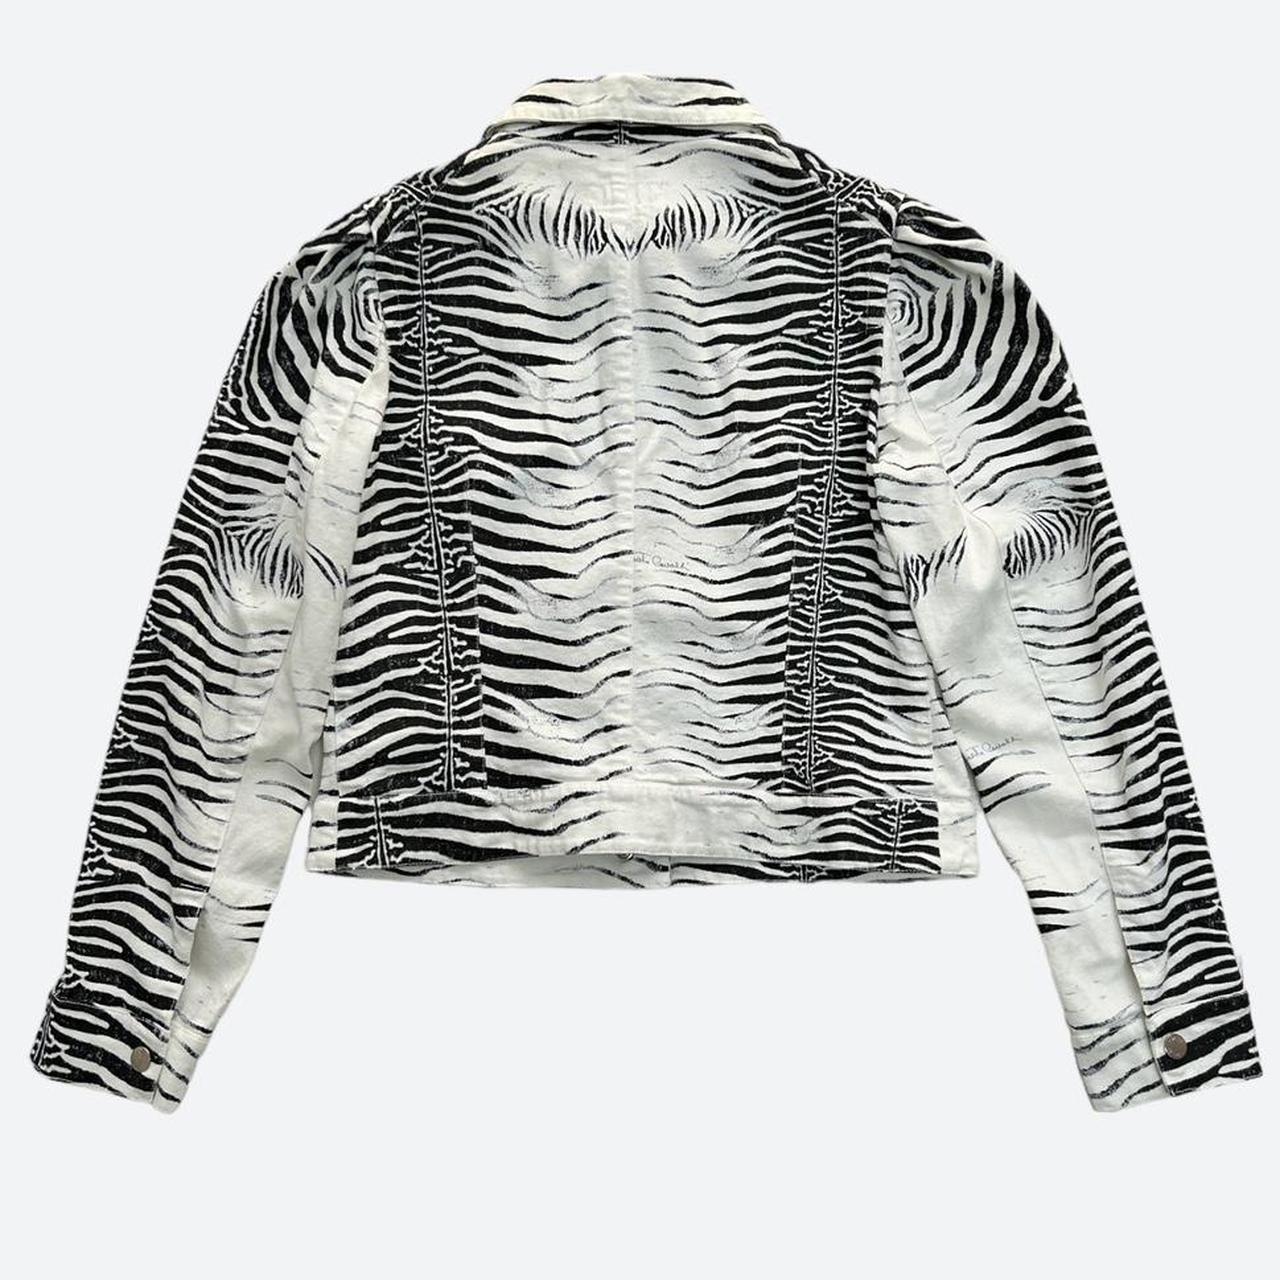 This jacket from the Roberto Cavalli SS 2000 collection offers a unique take on the
classic biker style and silhouette, one that displays a carefully placed symmetrical
zebra print all over.
Waist-length and in a size L, this cotton jacket features